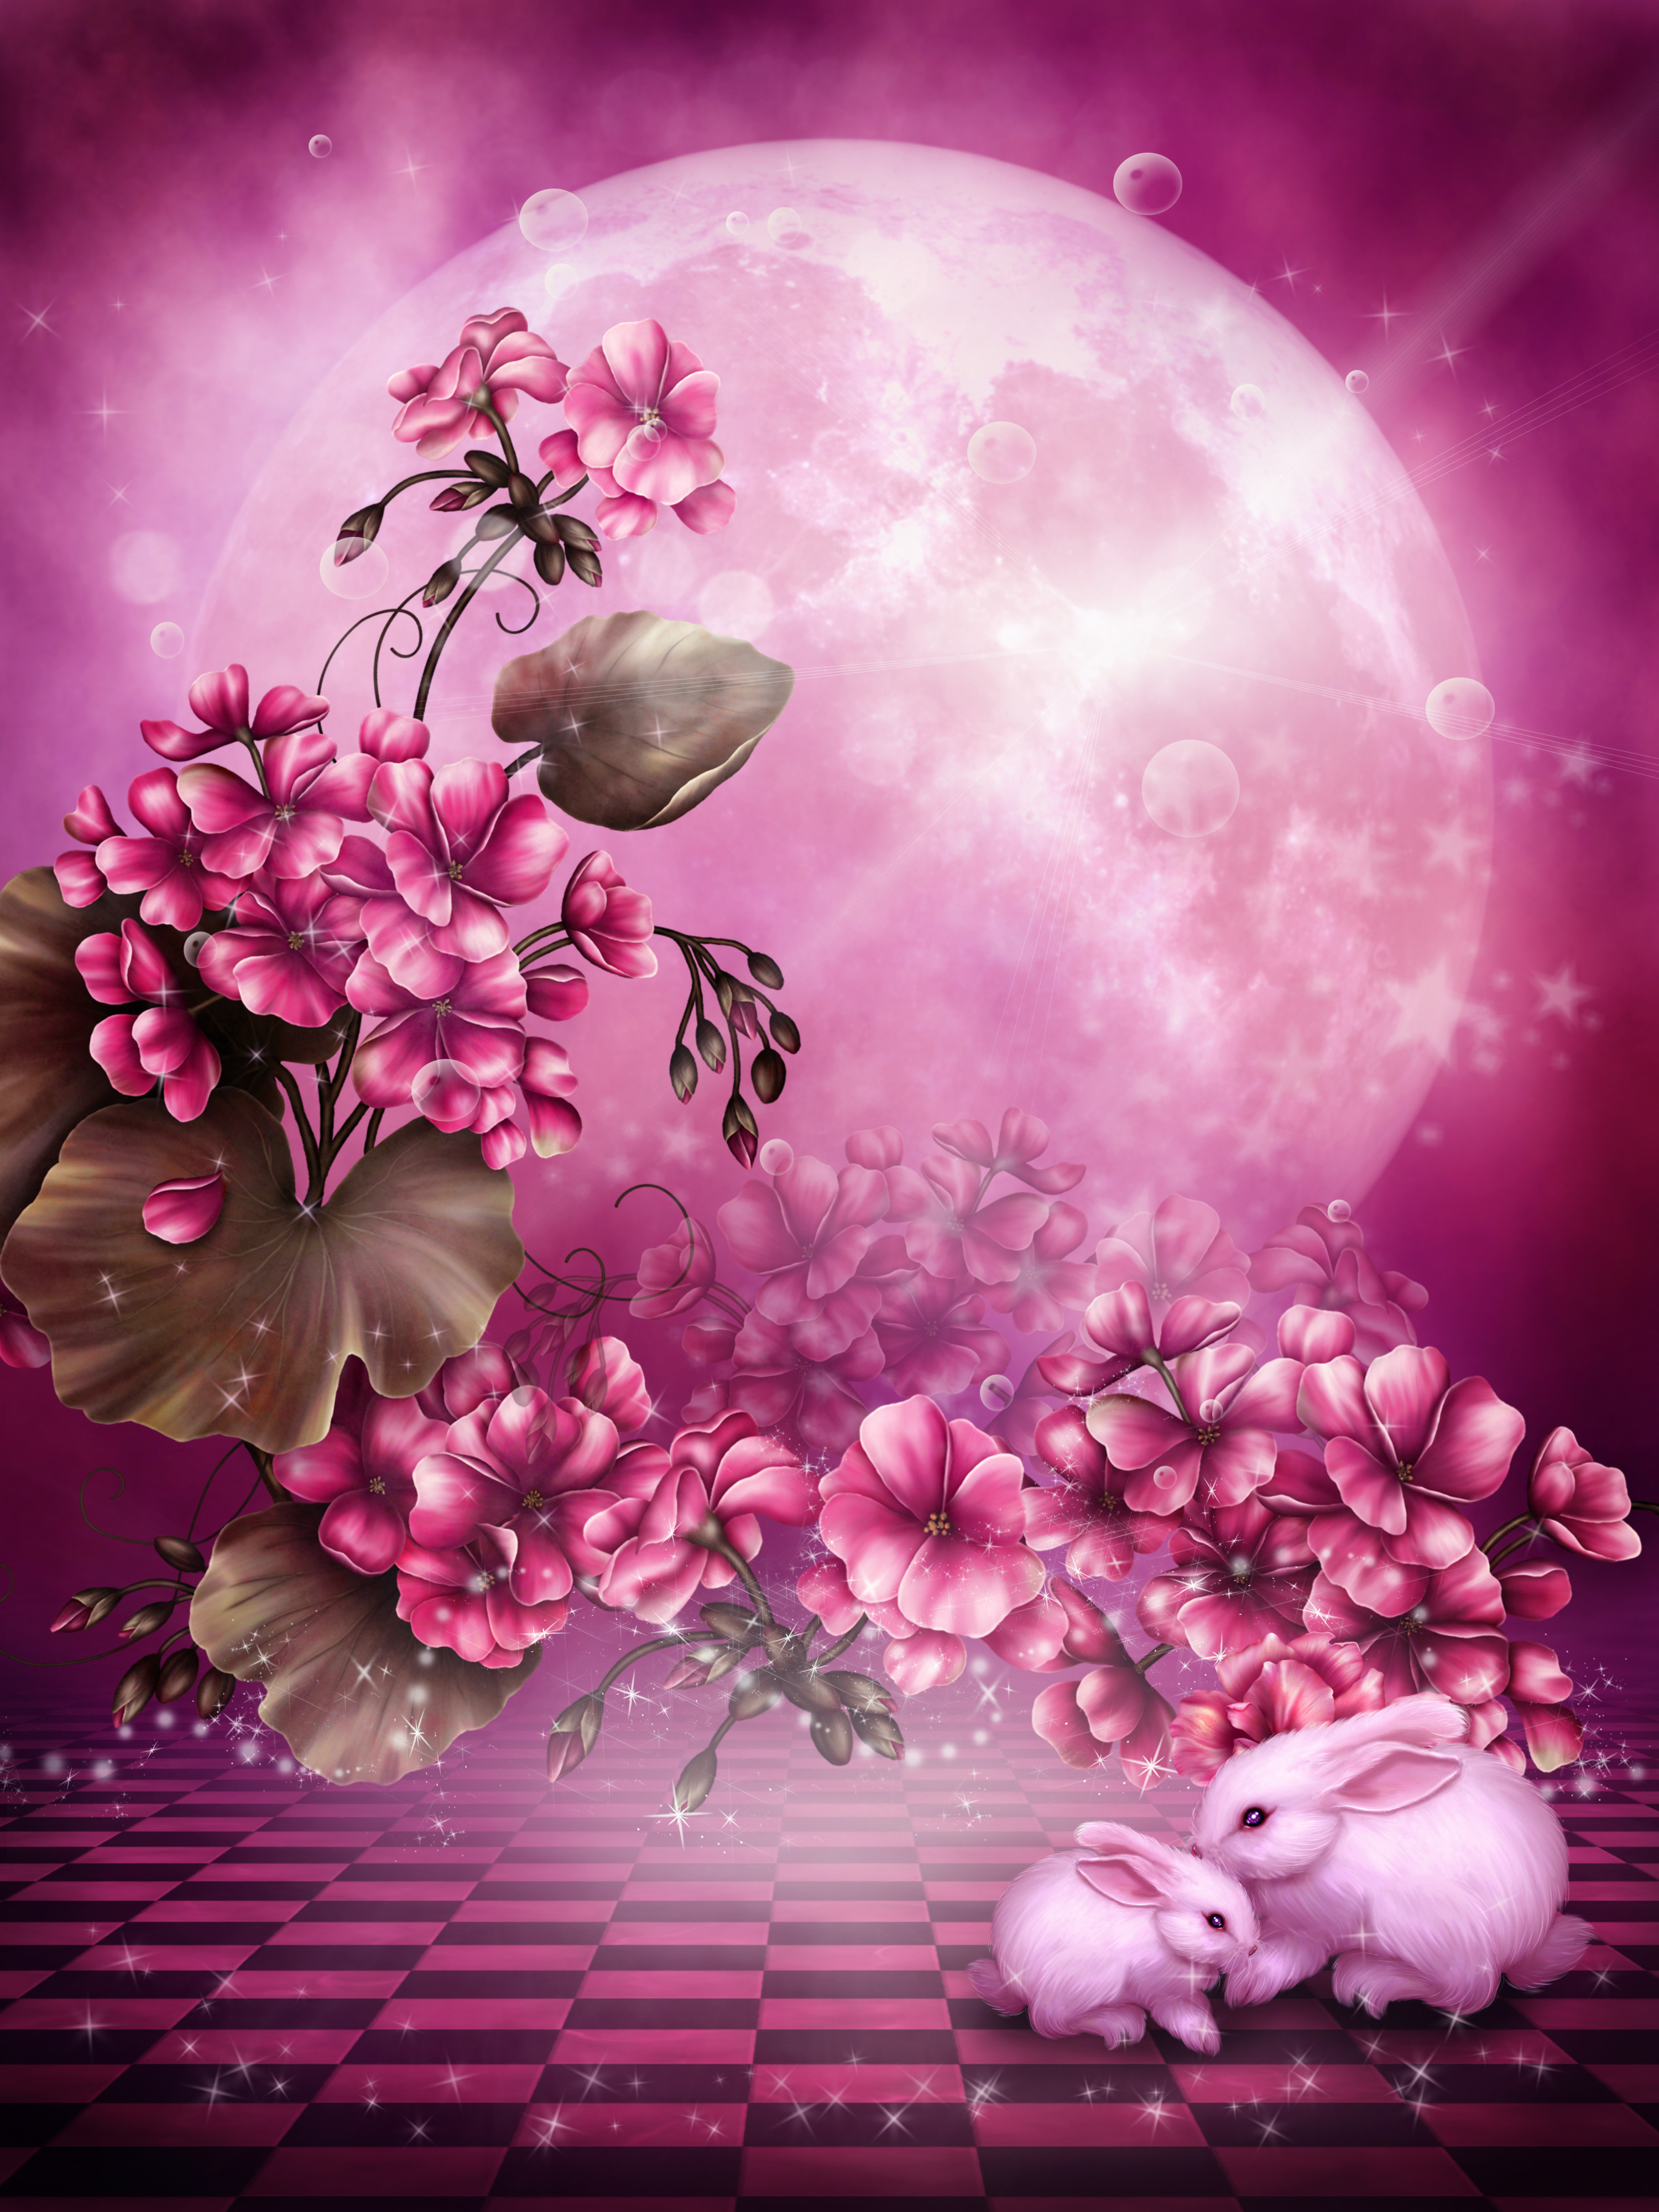 rabbits, pictures, plants, flowers, red Full HD